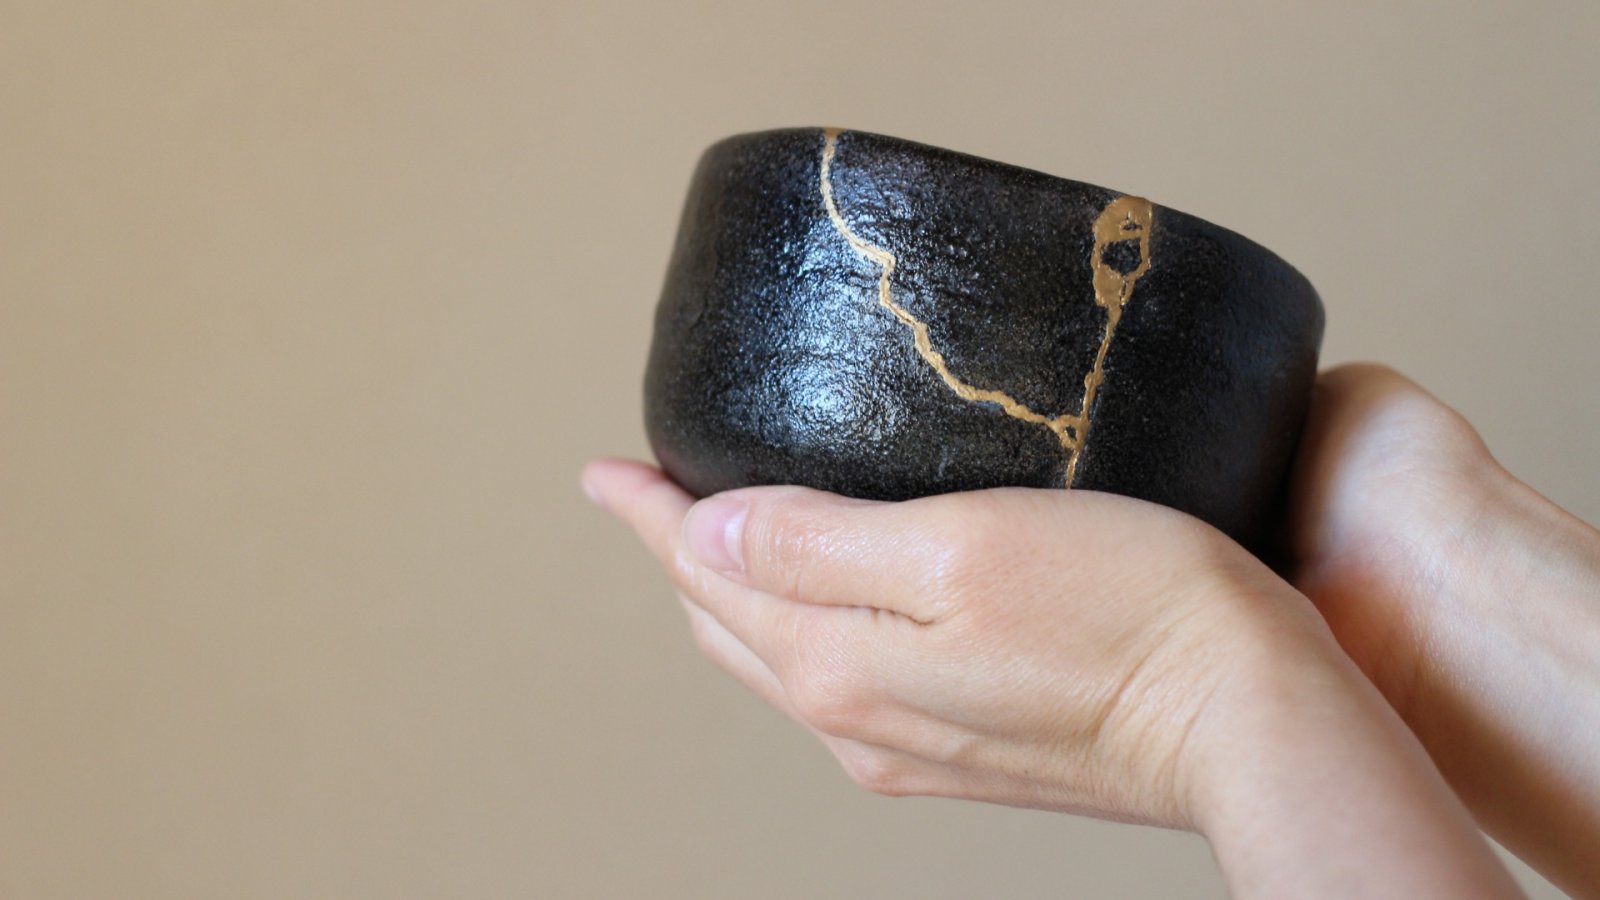 The centuries-old art of Kintsugi: finding beauty in imperfection